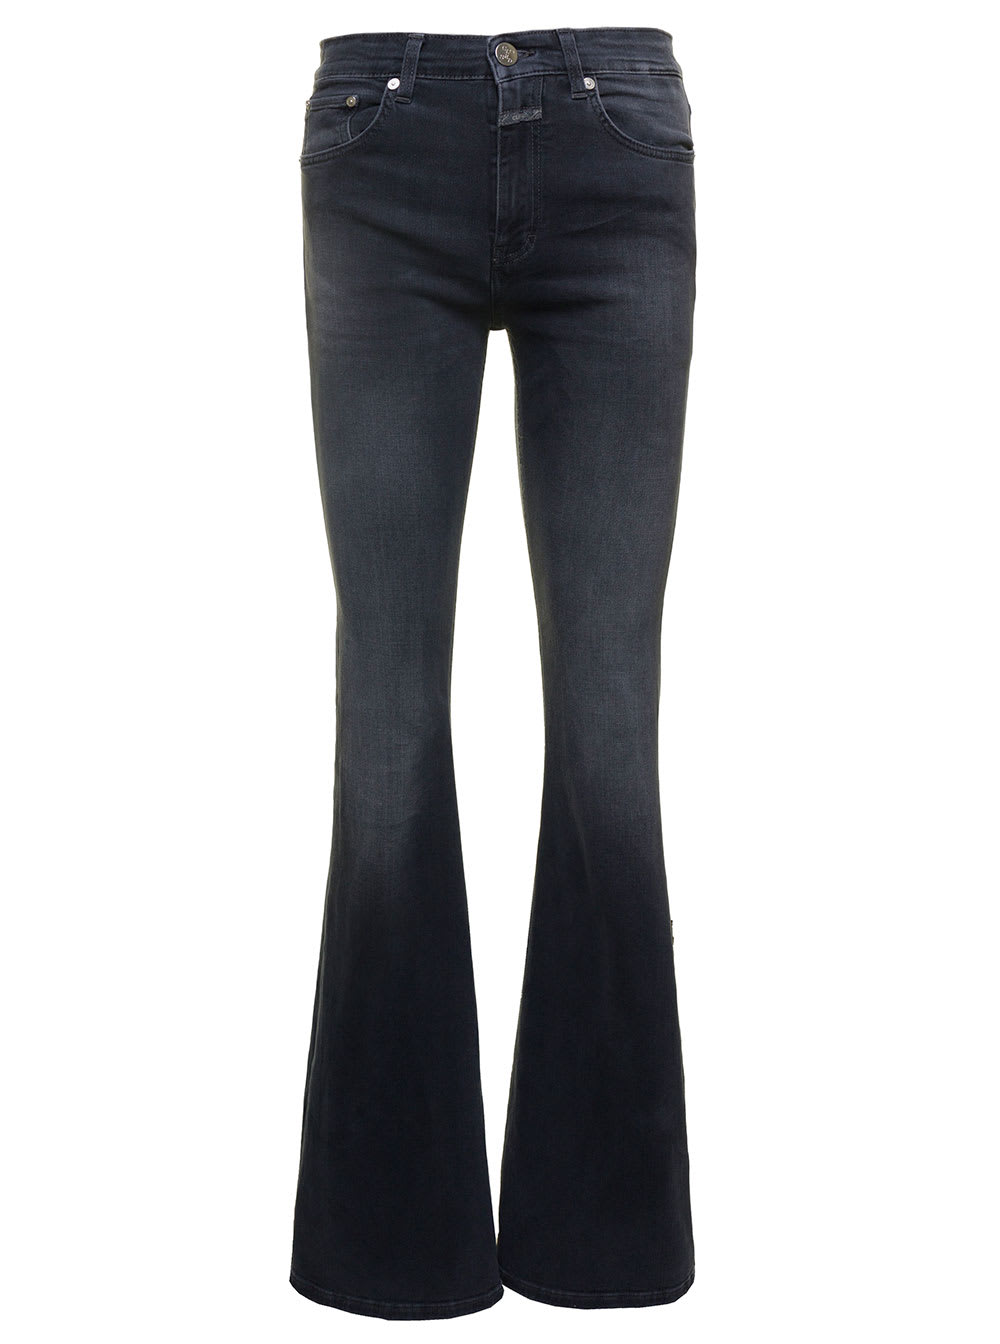 CLOSED ROWLING BLACK FLARED JEANS WITH LOGO PATCH IN STRETCH COTTON DENIM WOMAN